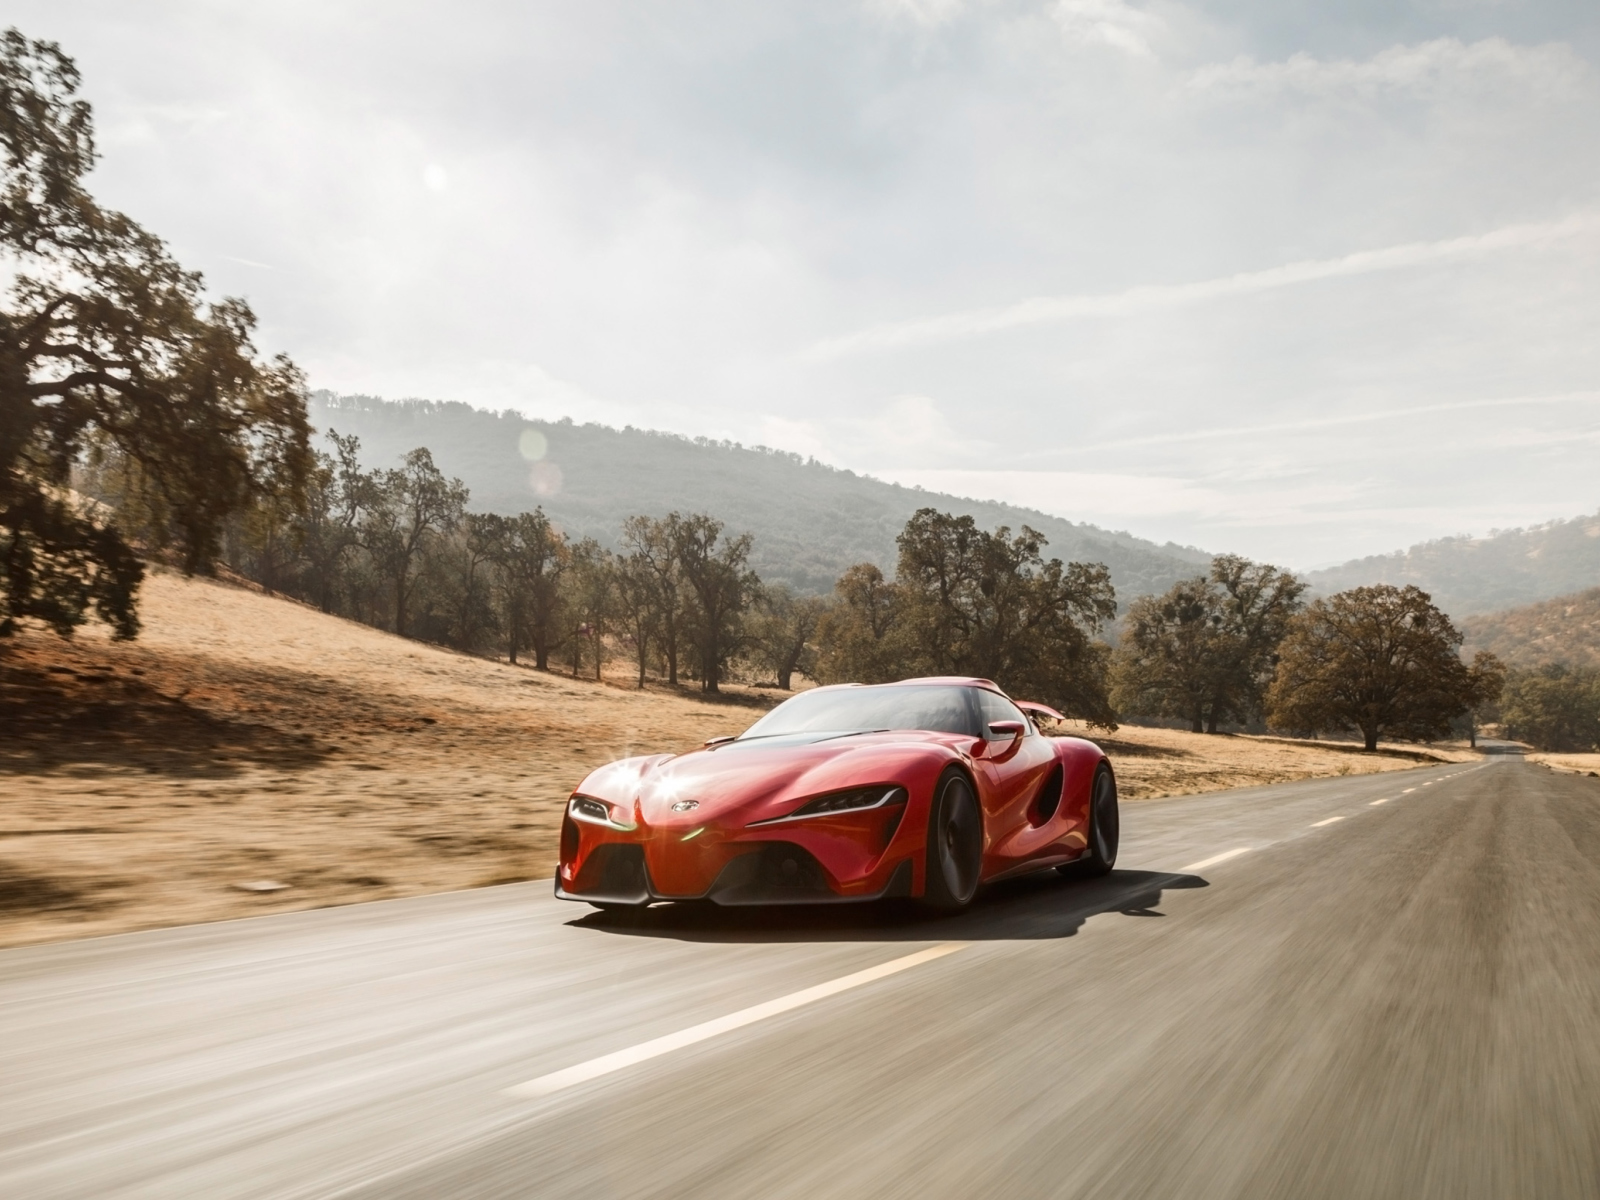 2014 Toyota Ft 1 Concept Front Angle wallpaper 1600x1200